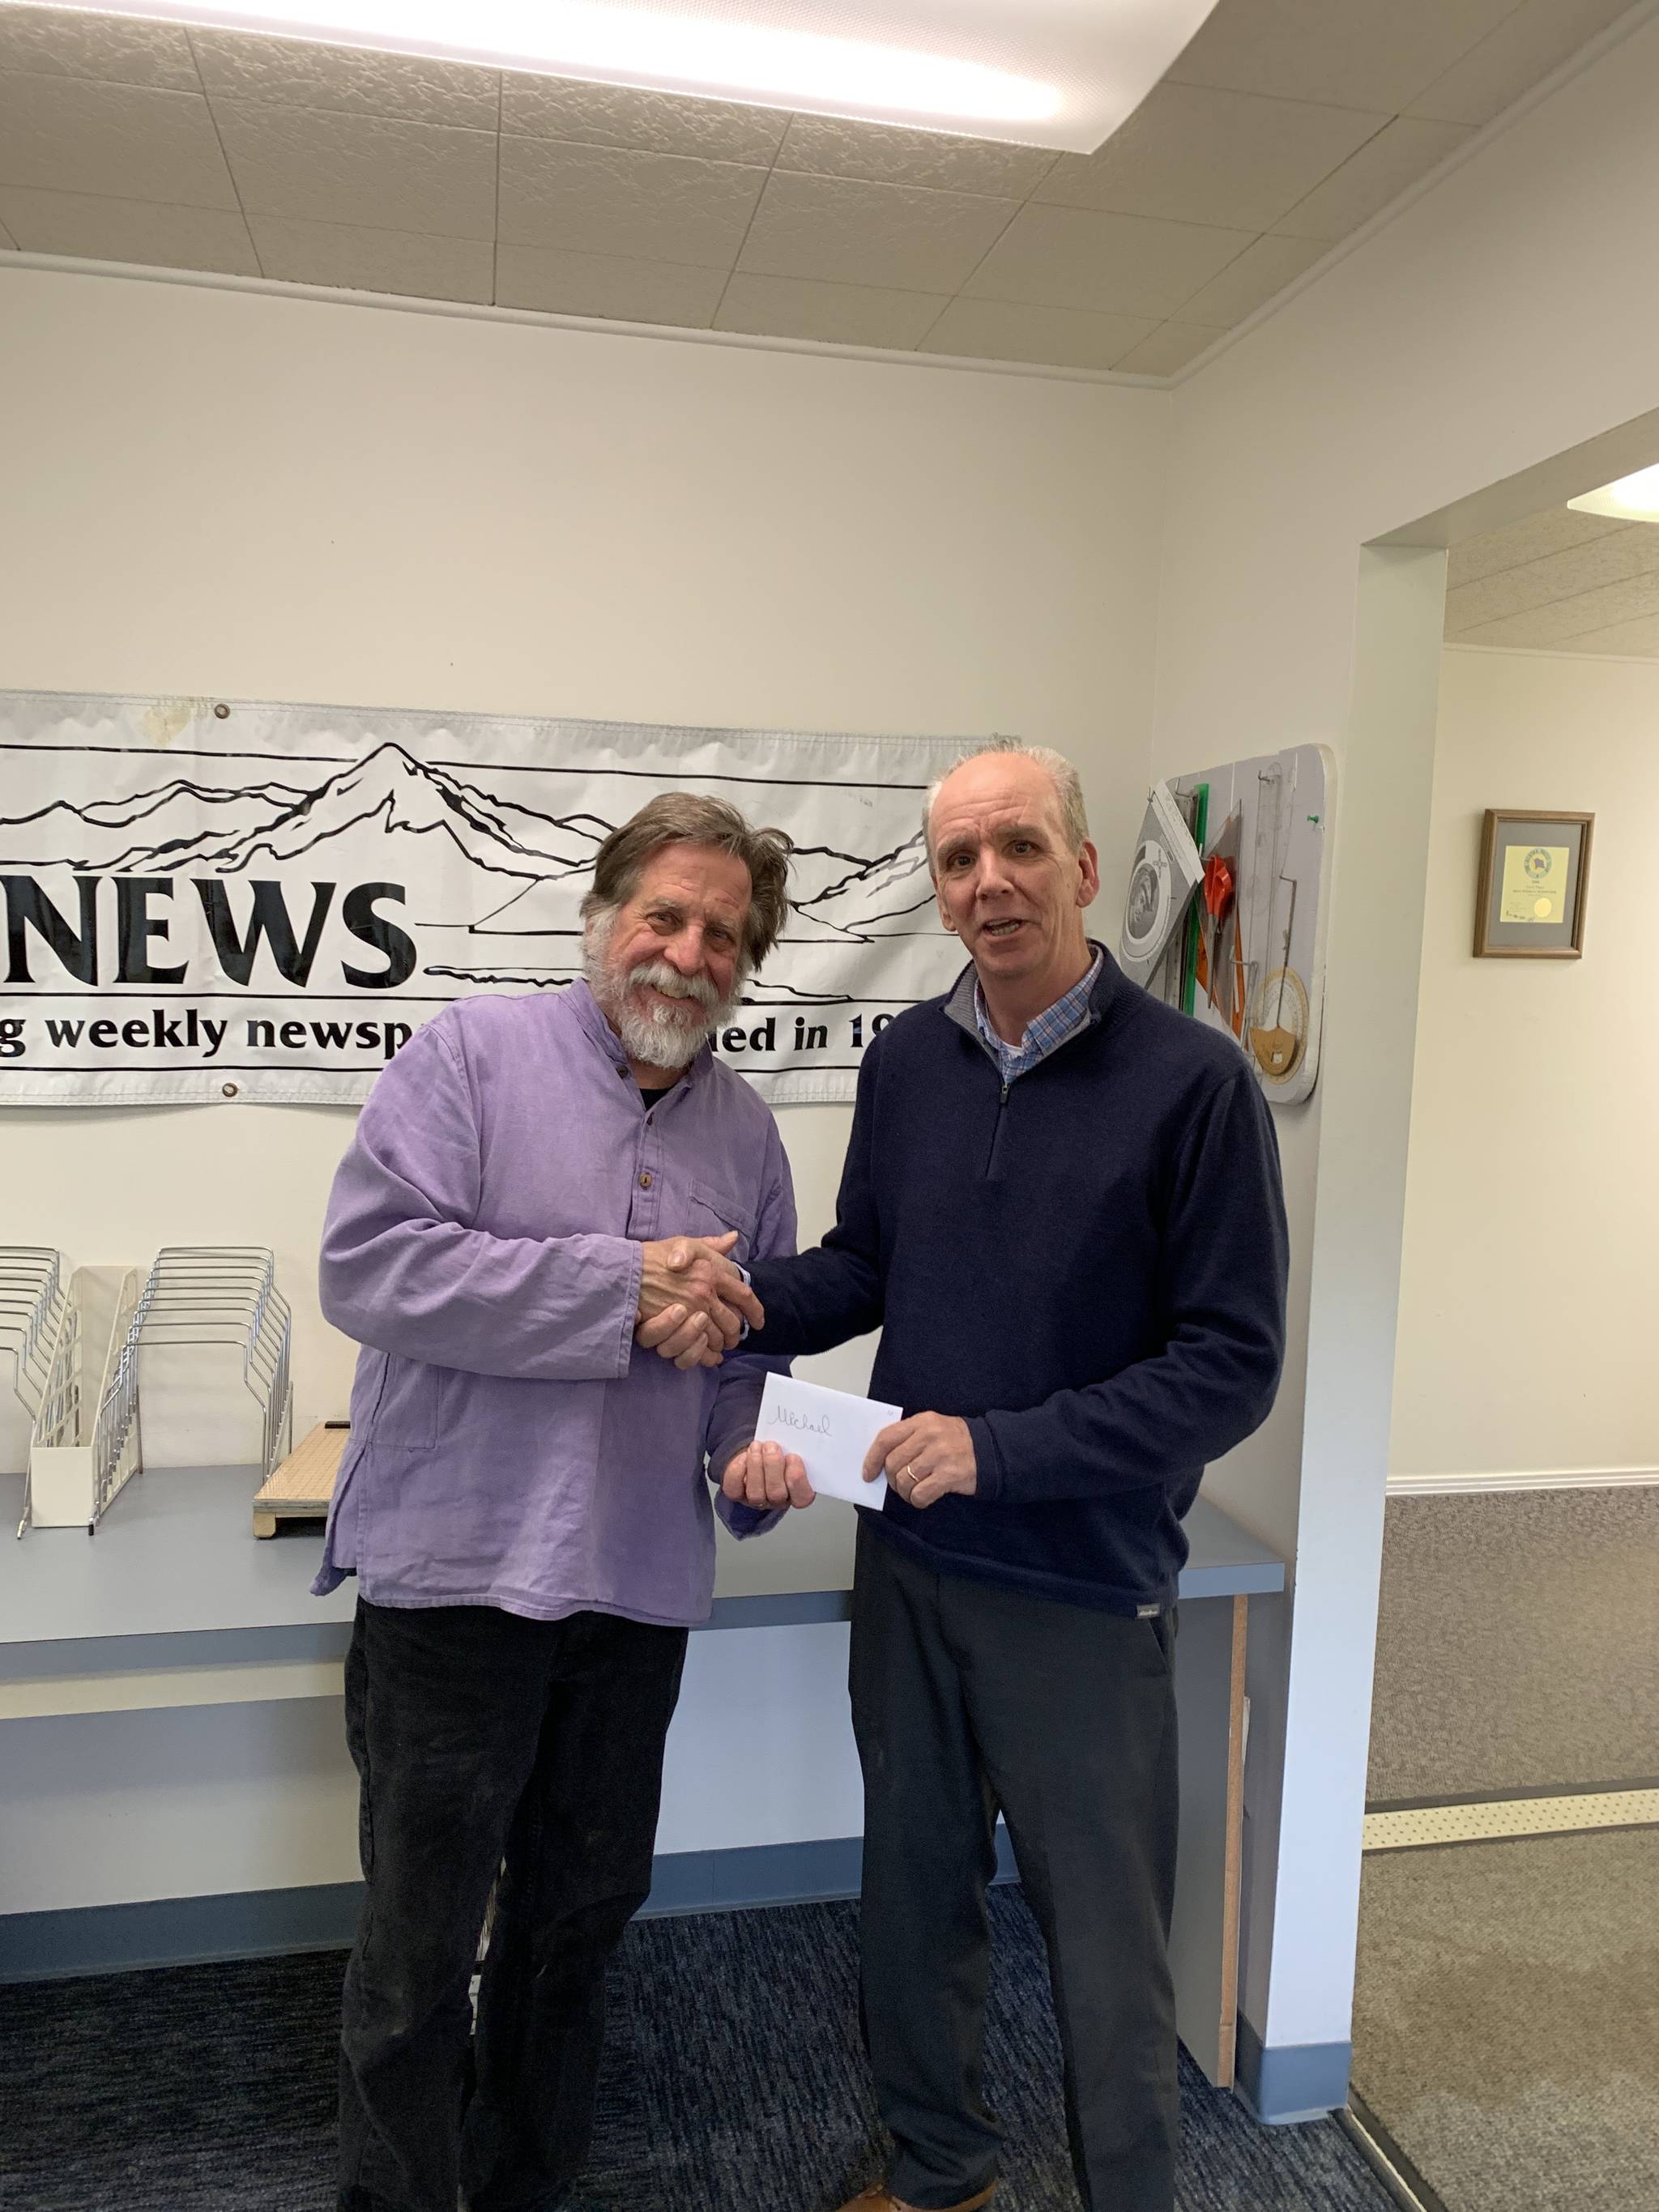 Homer News Editor Michael Armstrong, left, is presented with an award from Publisher Jeff Hayden. (Photo provided by the Homer News)